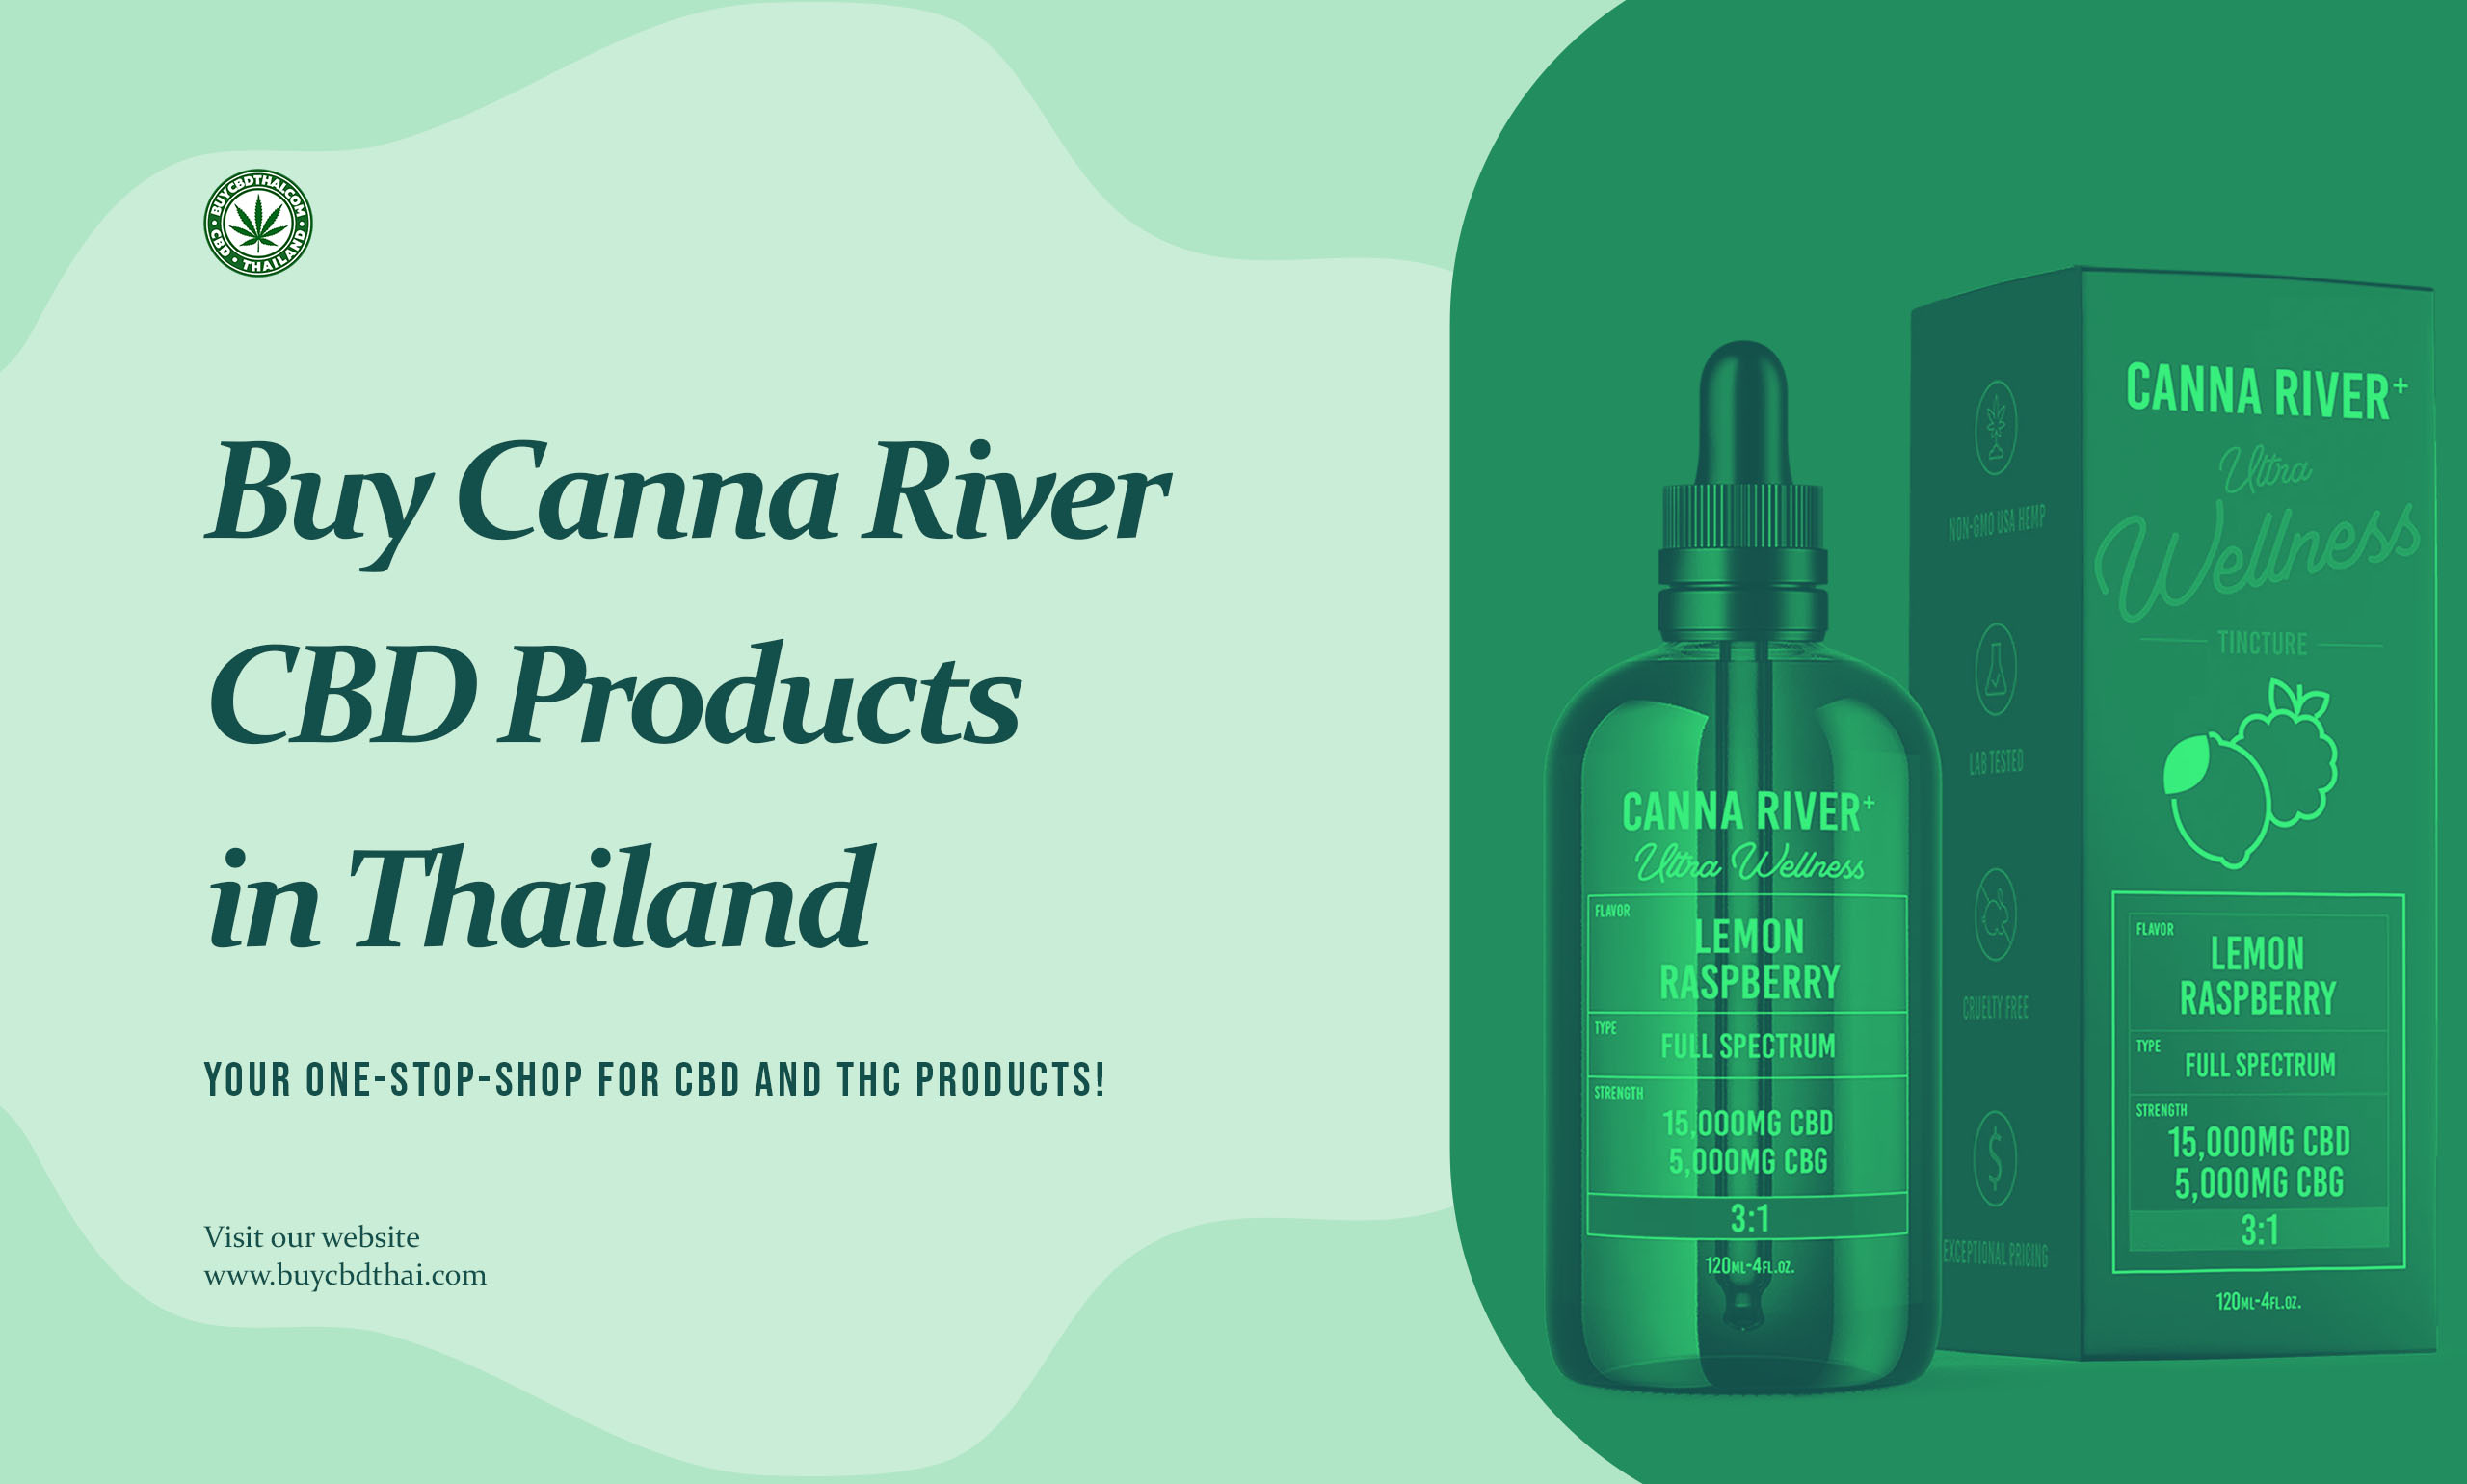 Buy Canna River CBD Products in Thailand at Buycbdthai's Online Shop